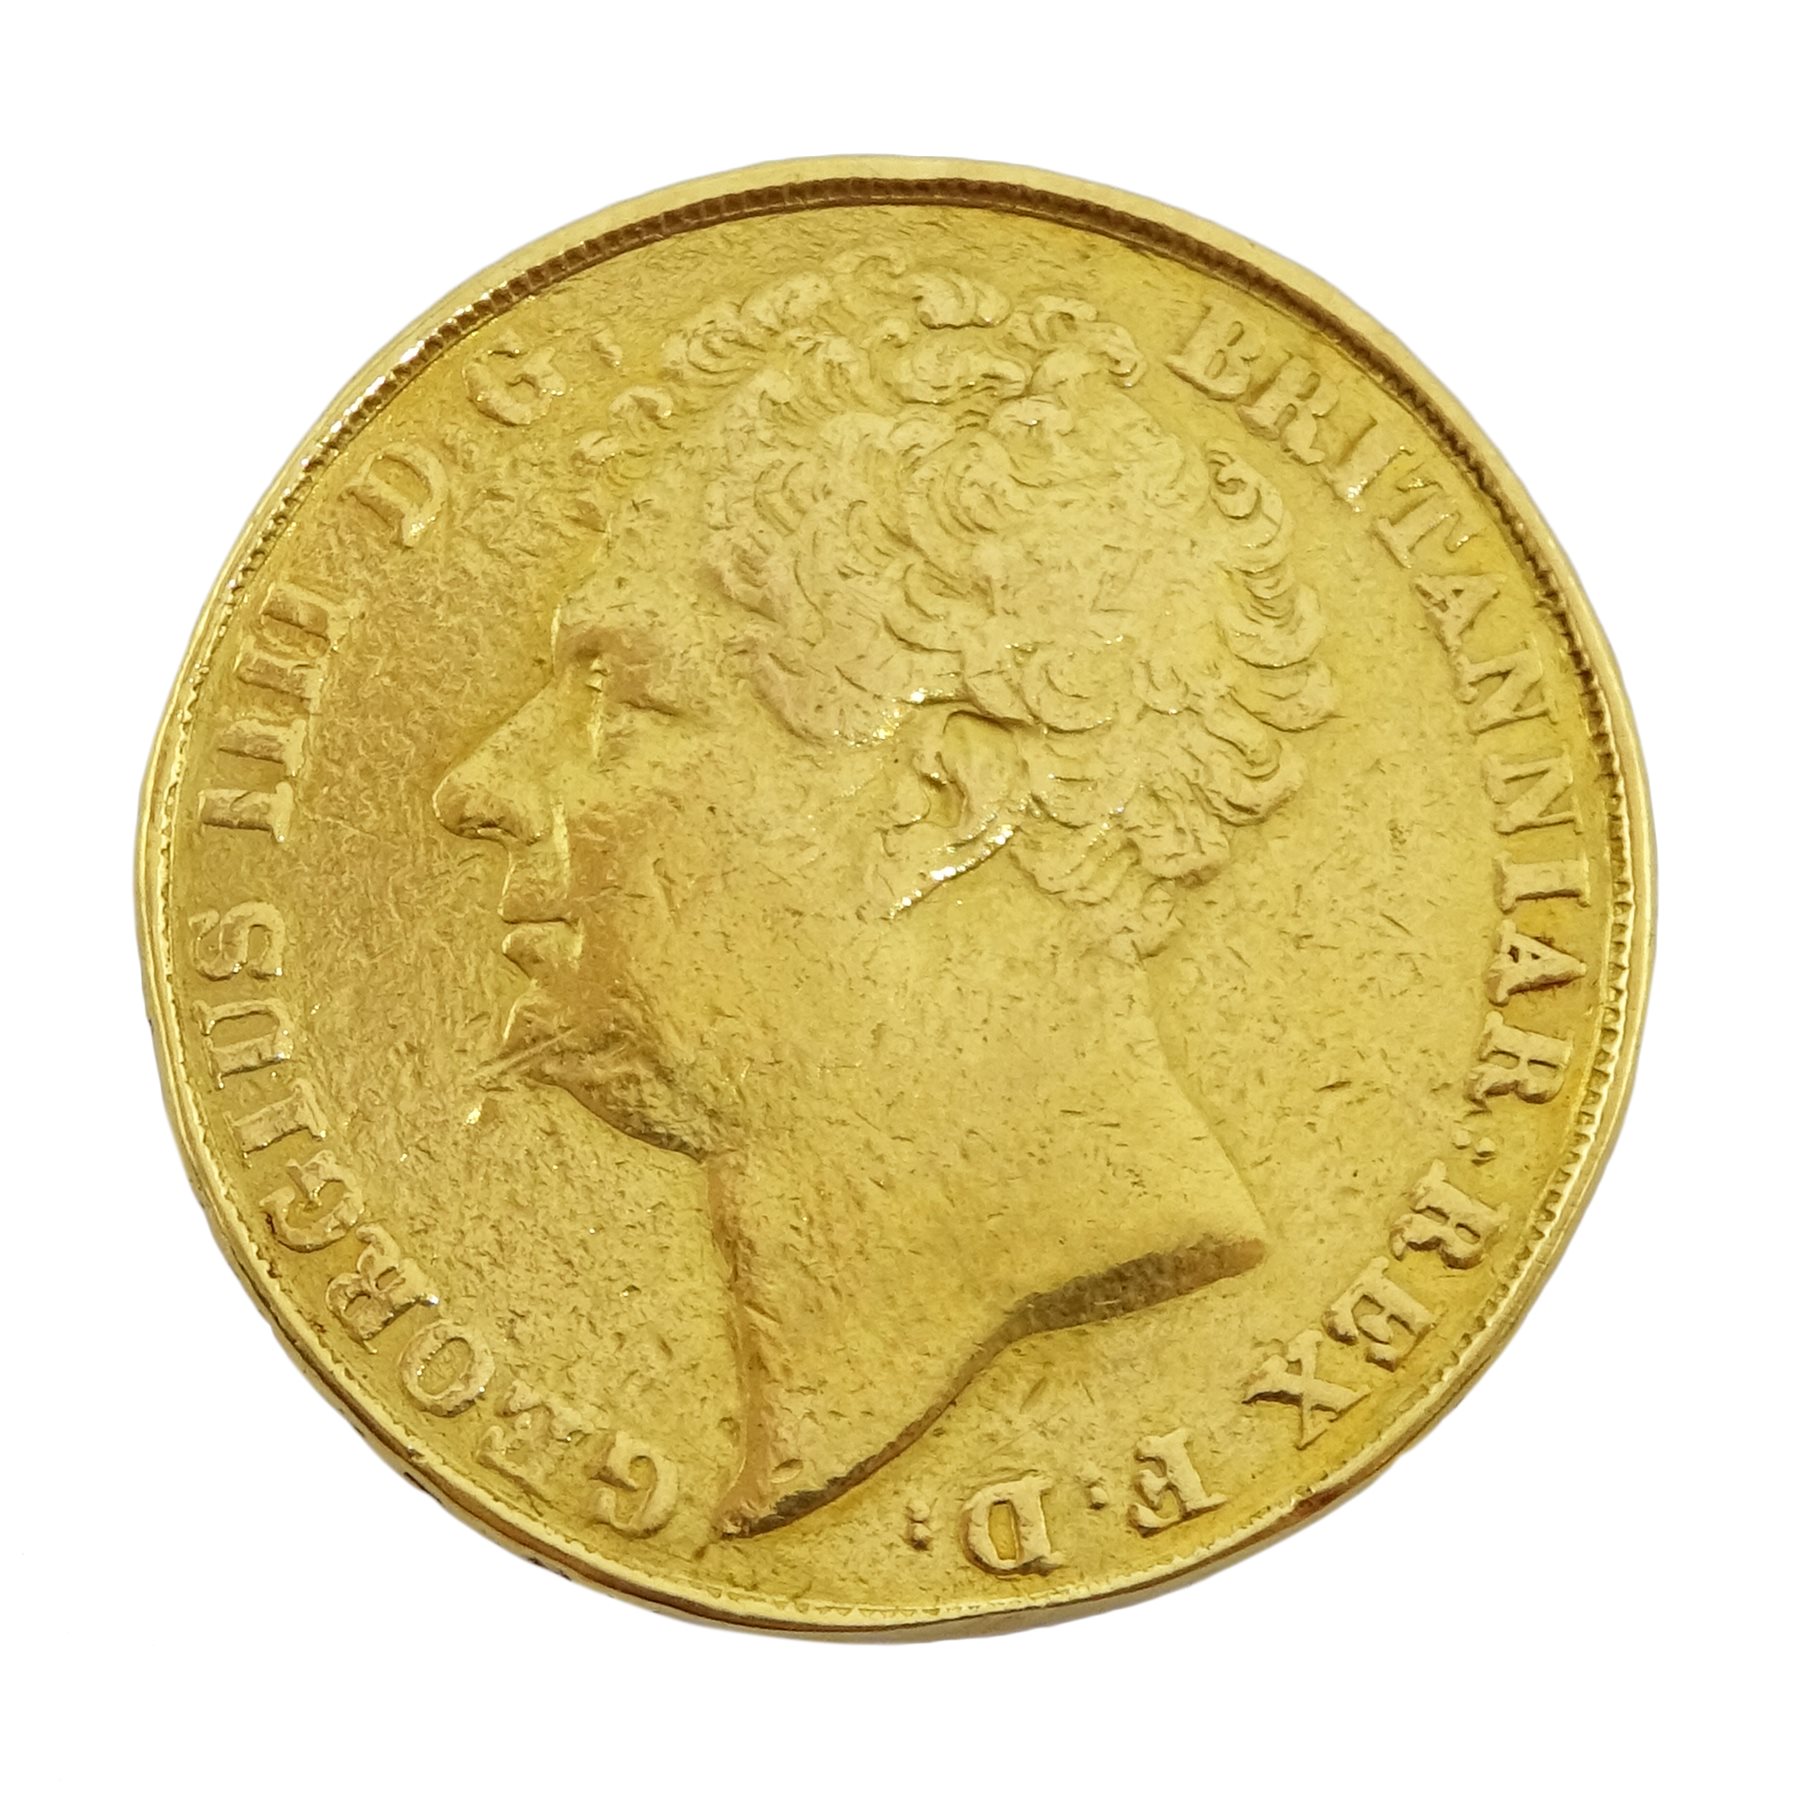 King George IV 1823 gold double sovereign - Image 2 of 2